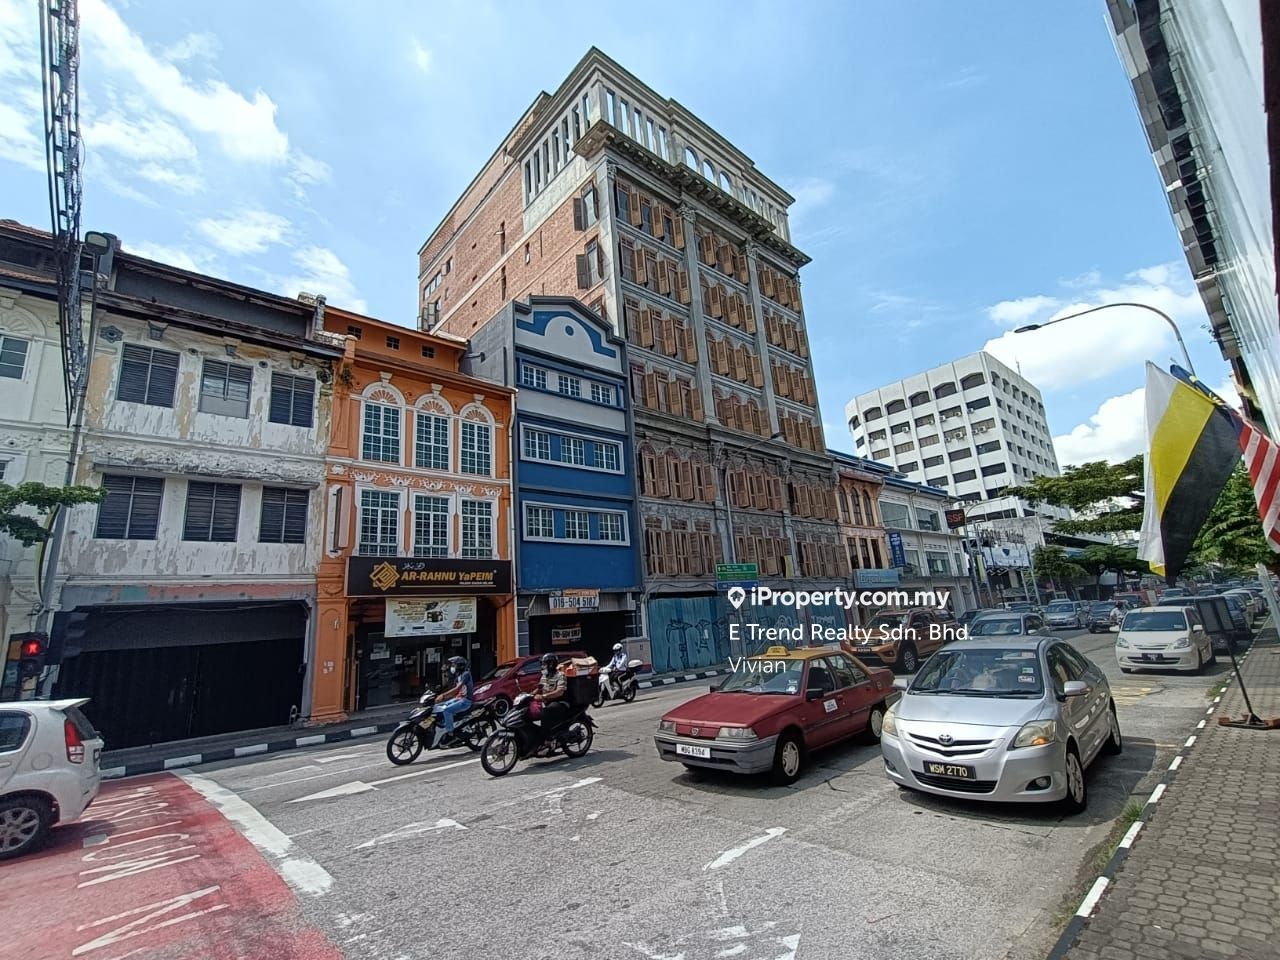 Tin City Hotel For Sale In Ipoh Town, Ipoh